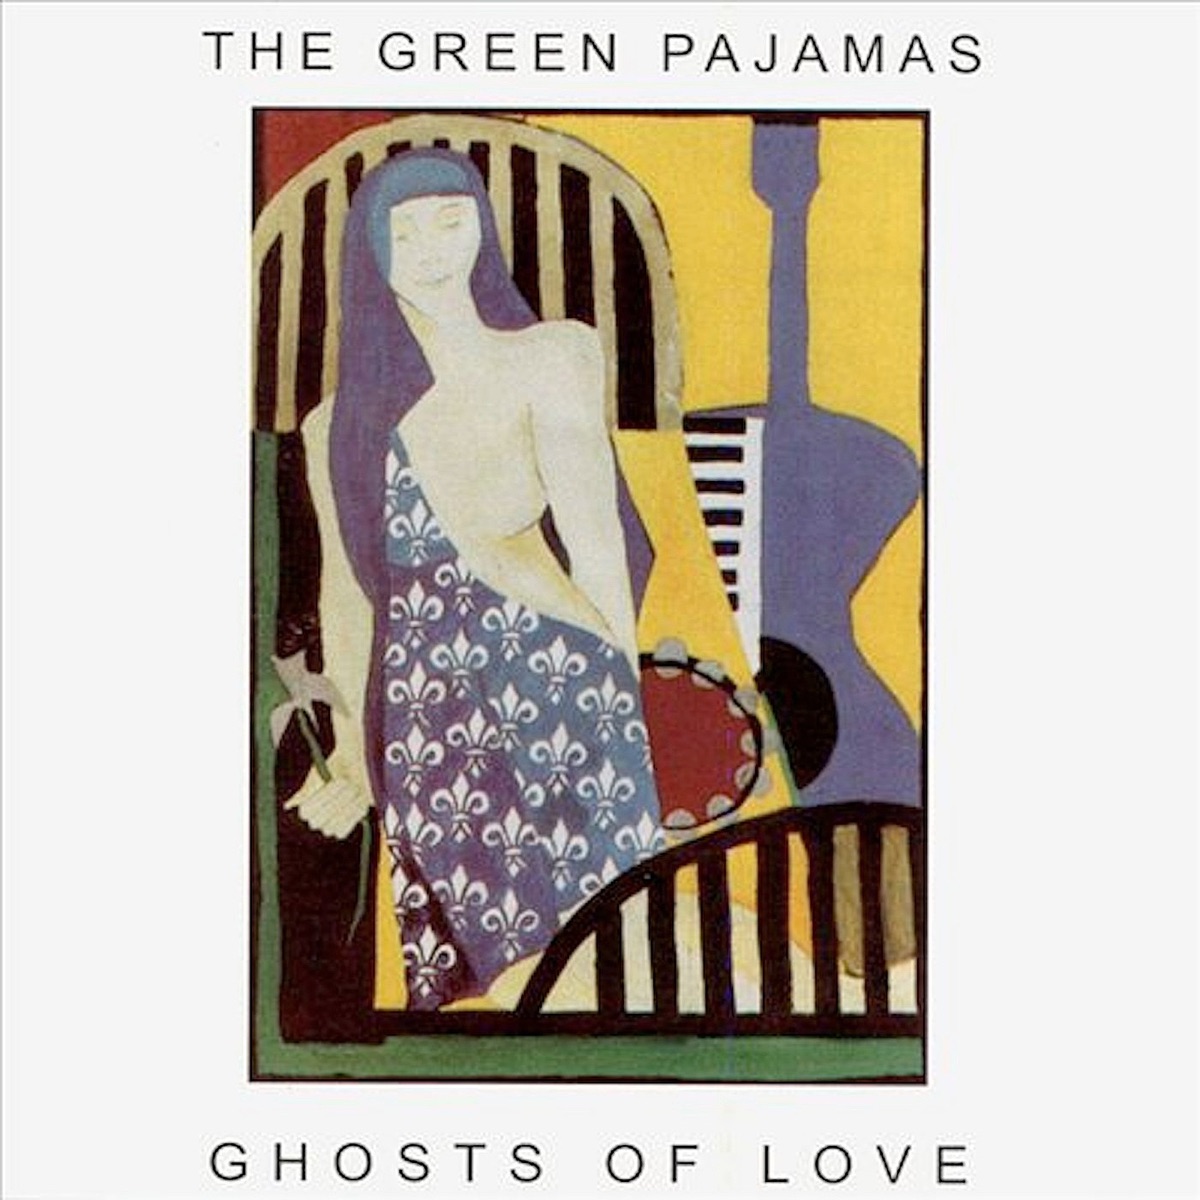 If You Knew What I Dreamed ... The Green Pajamas Play the Jeff Kelly  Songbook by The Green Pajamas on Apple Music